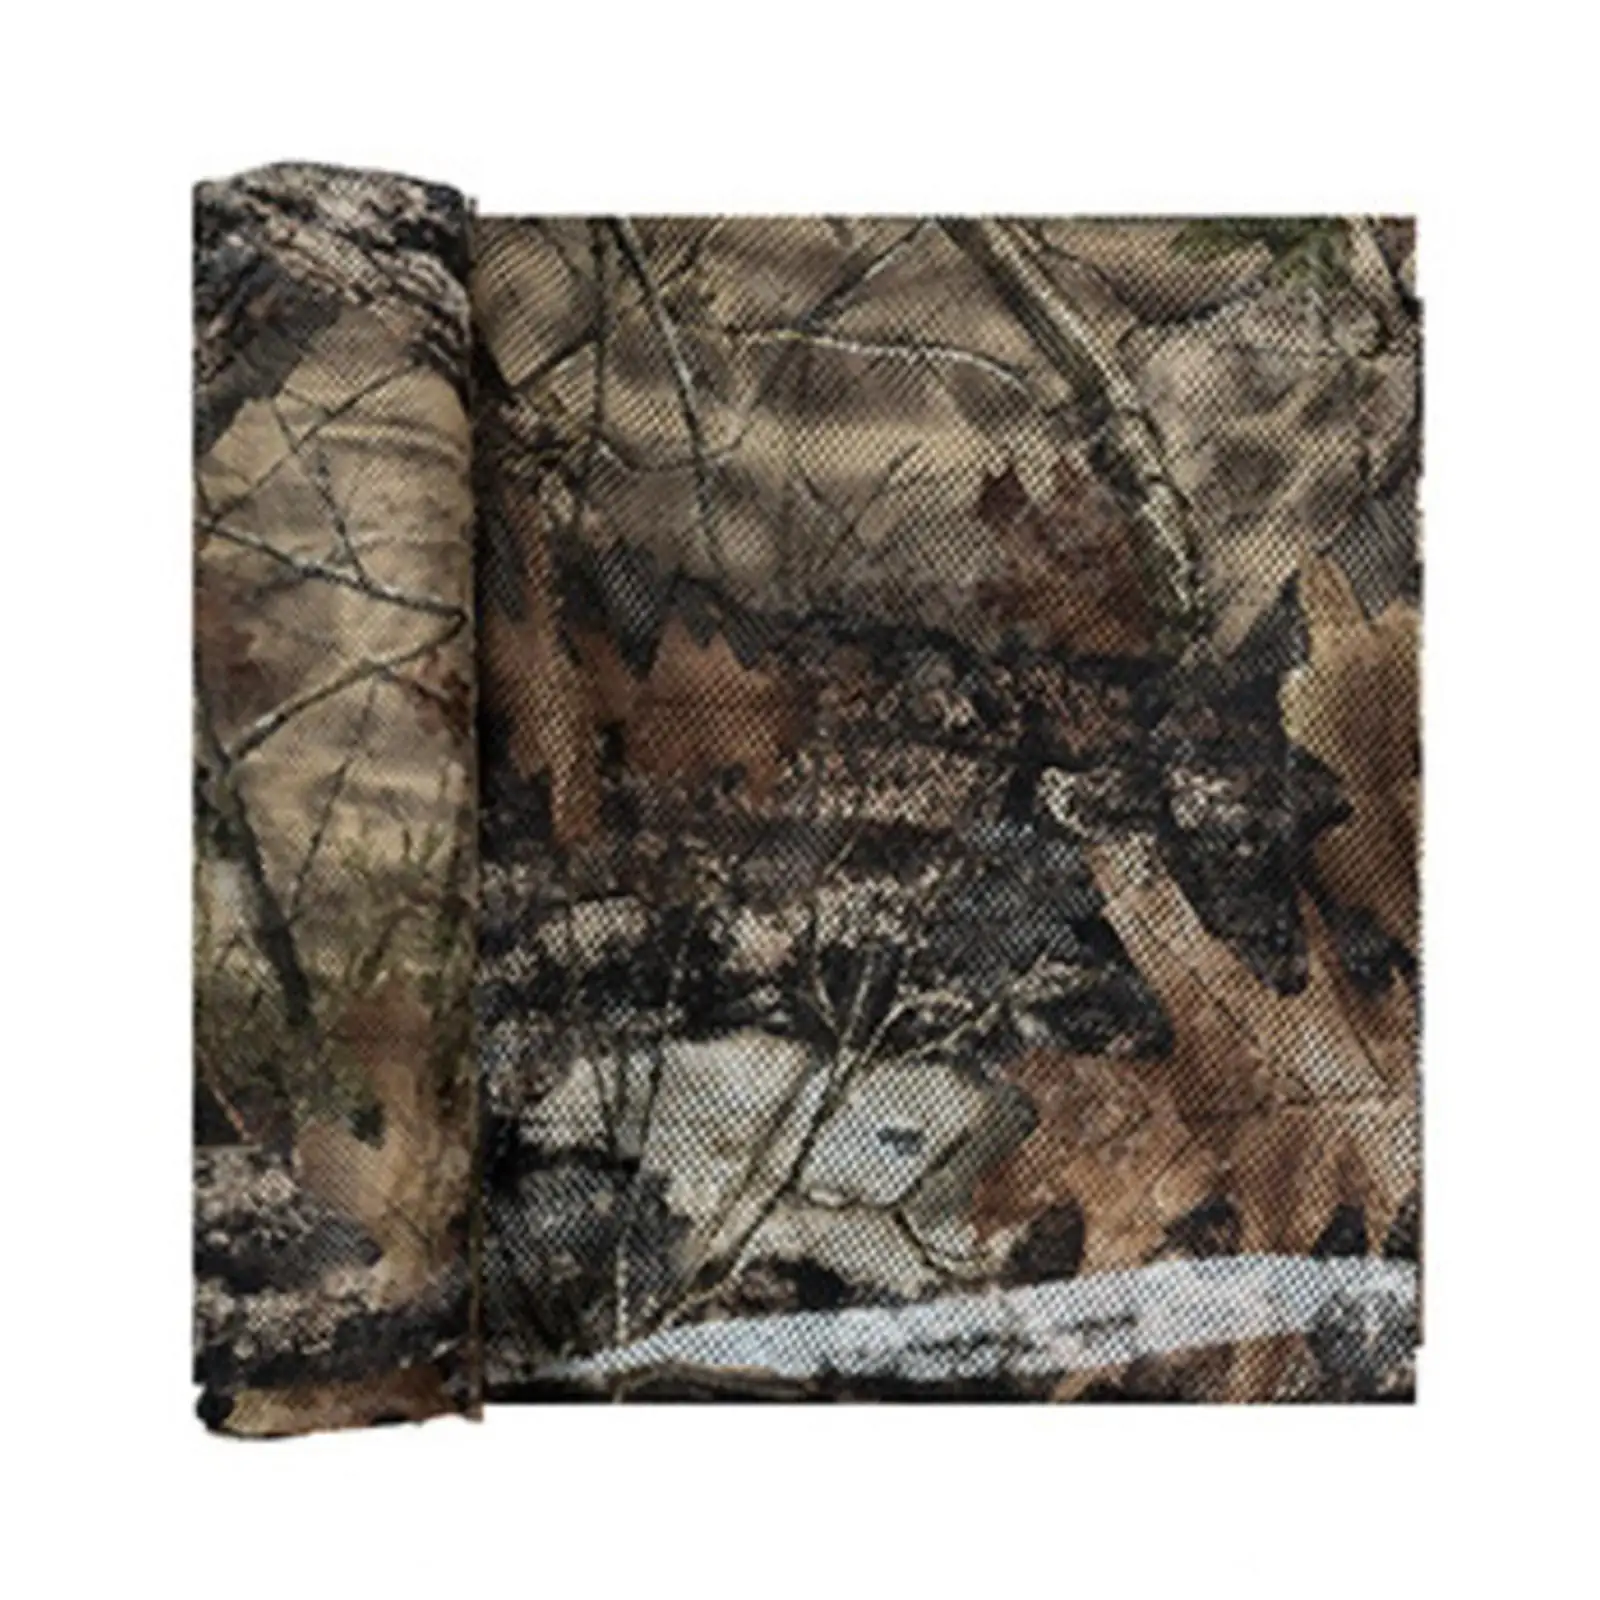 Camo Net Jungle Large Cover Lightweight Camo Mesh for Front Yard Decoration